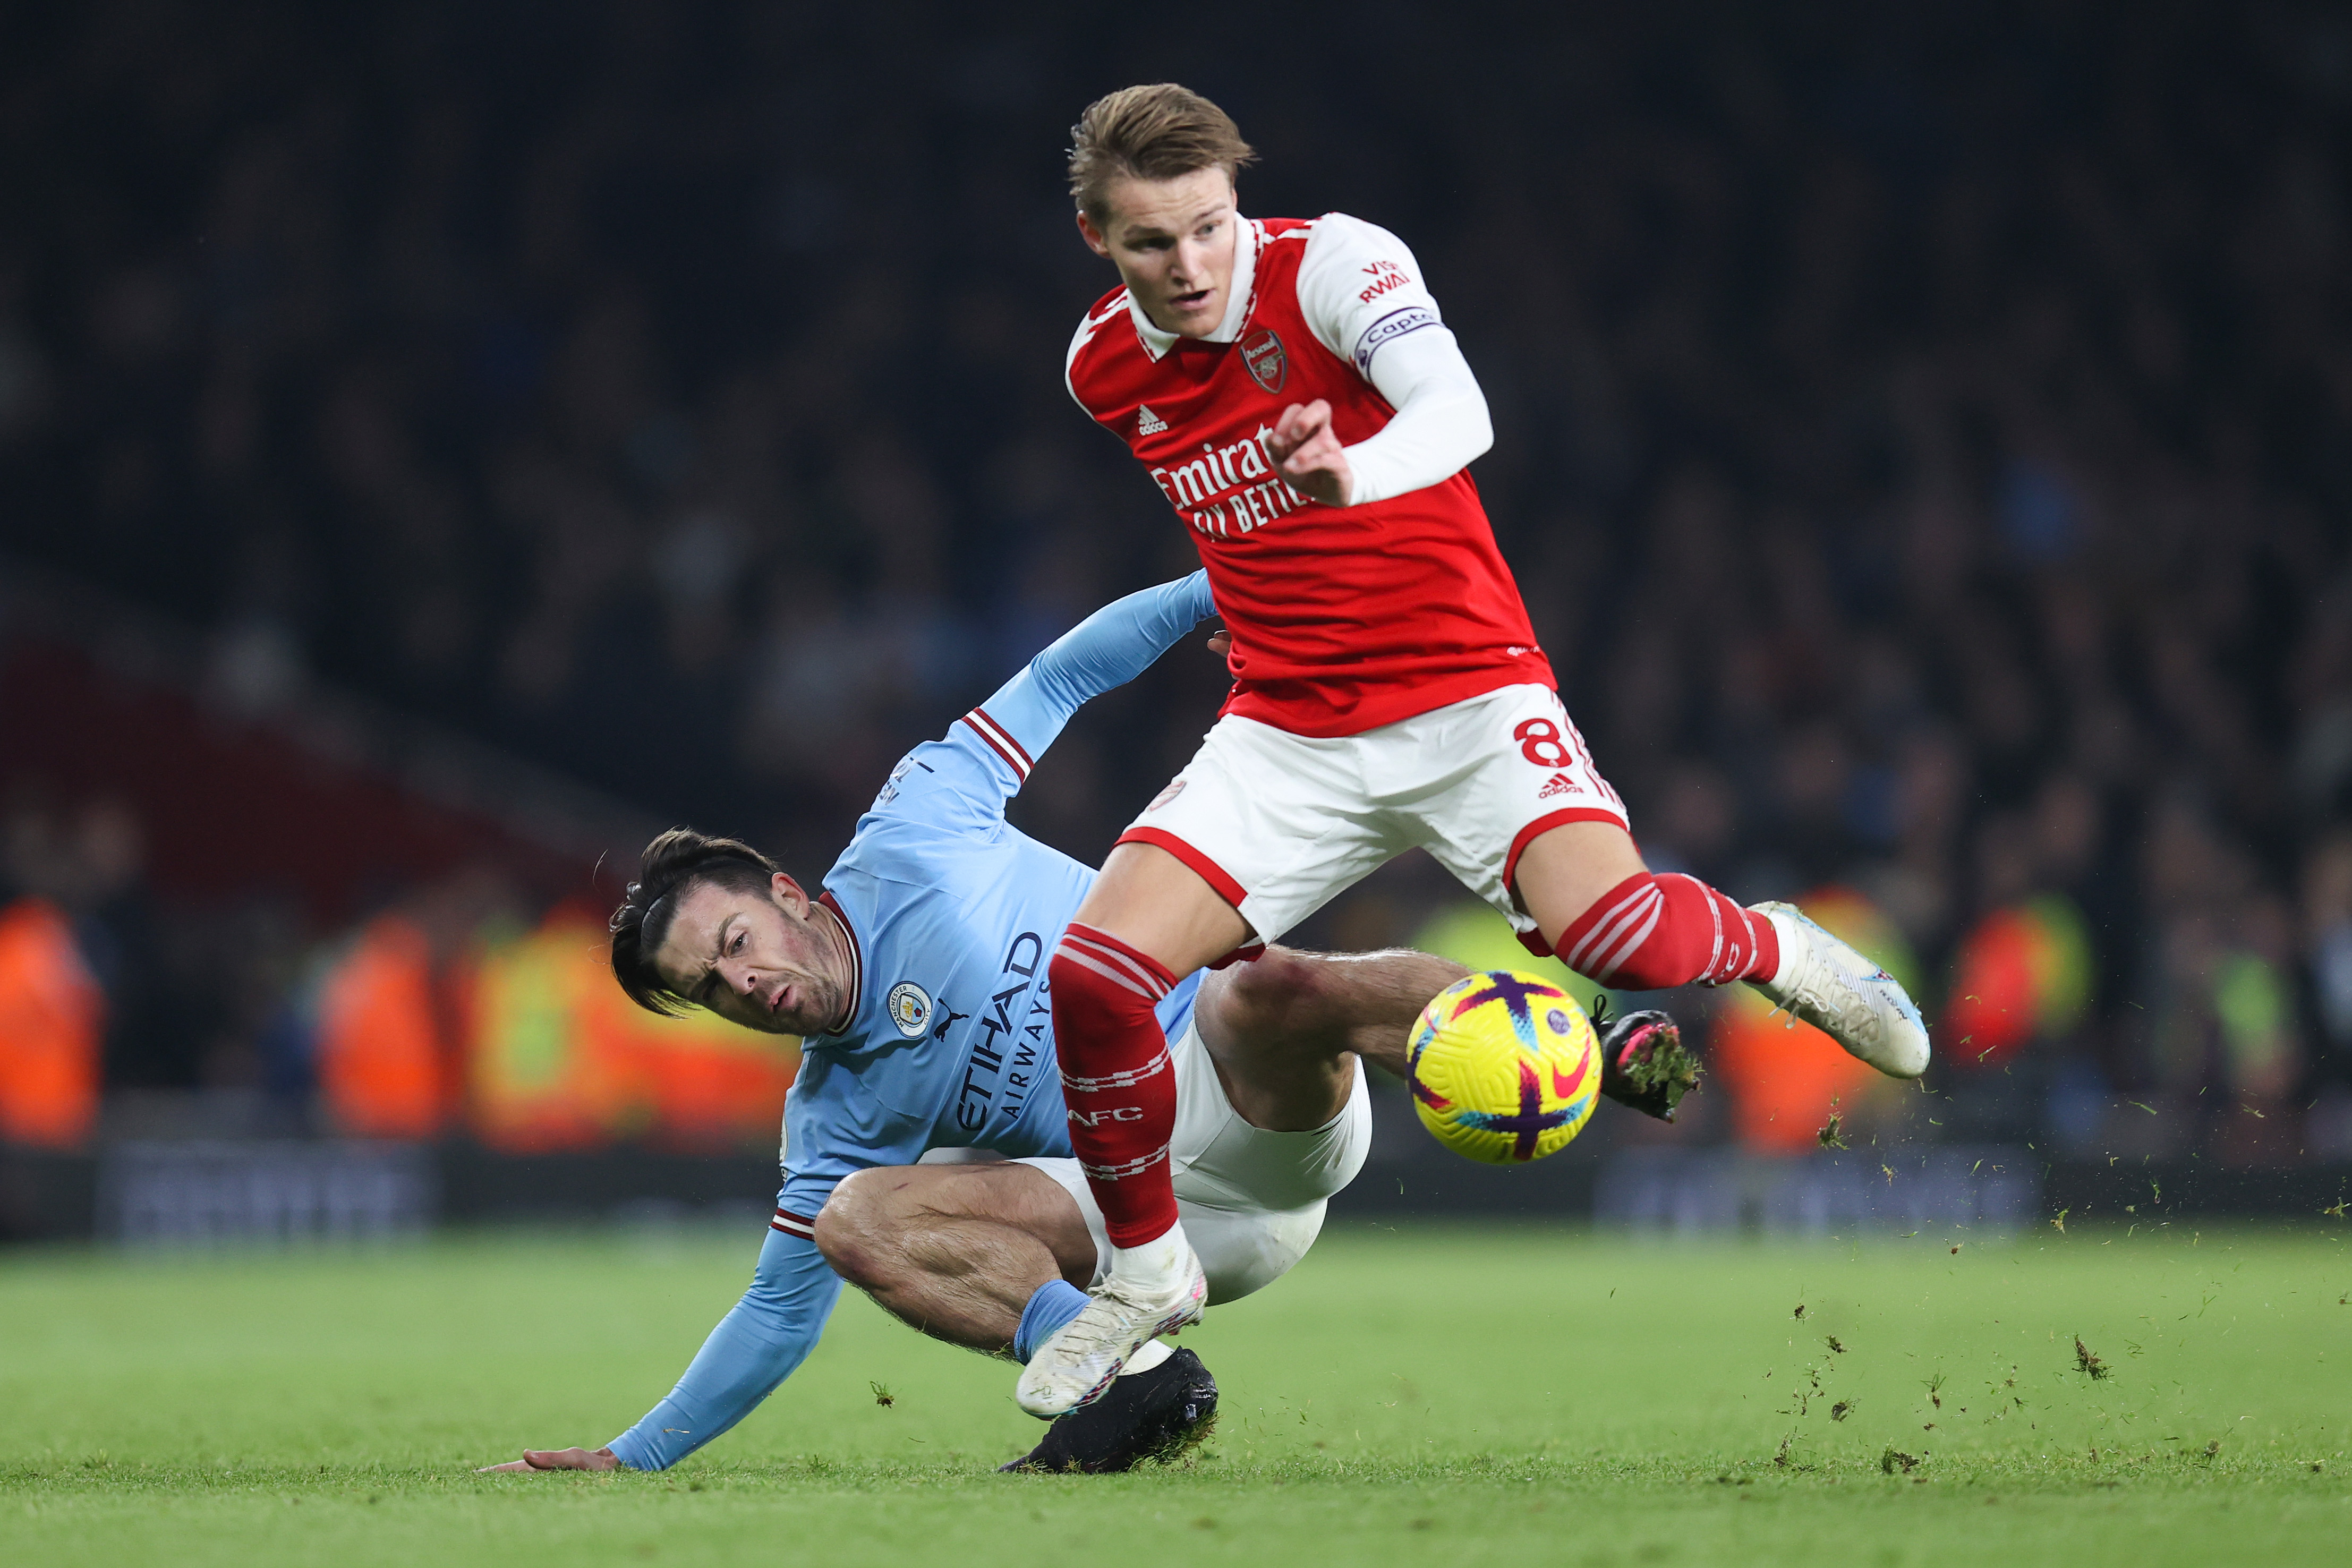 Live Blog: Manchester City 4-1 Arsenal in top of the table clash